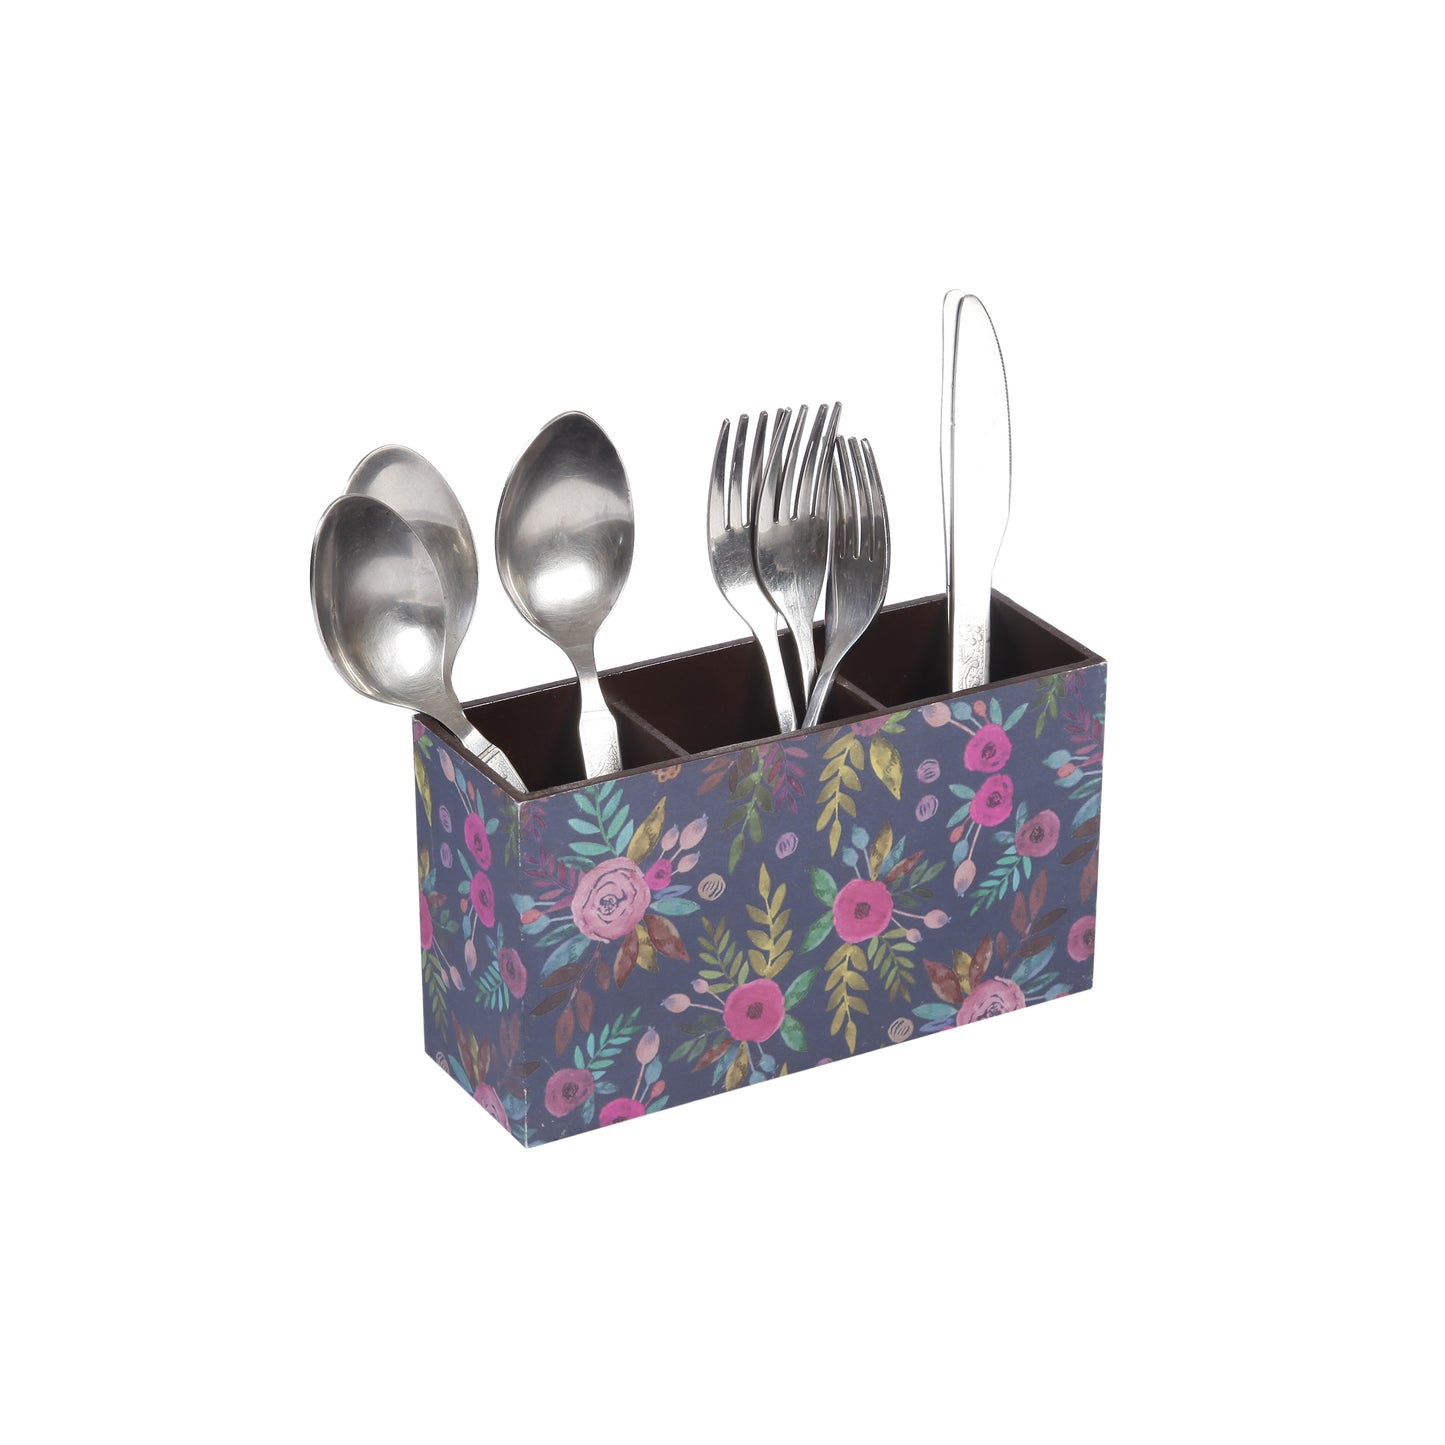 A Tiny Mistake Blue Floral Pattern Wooden Cutlery Holder, 18 x 10 x 6.5 cm